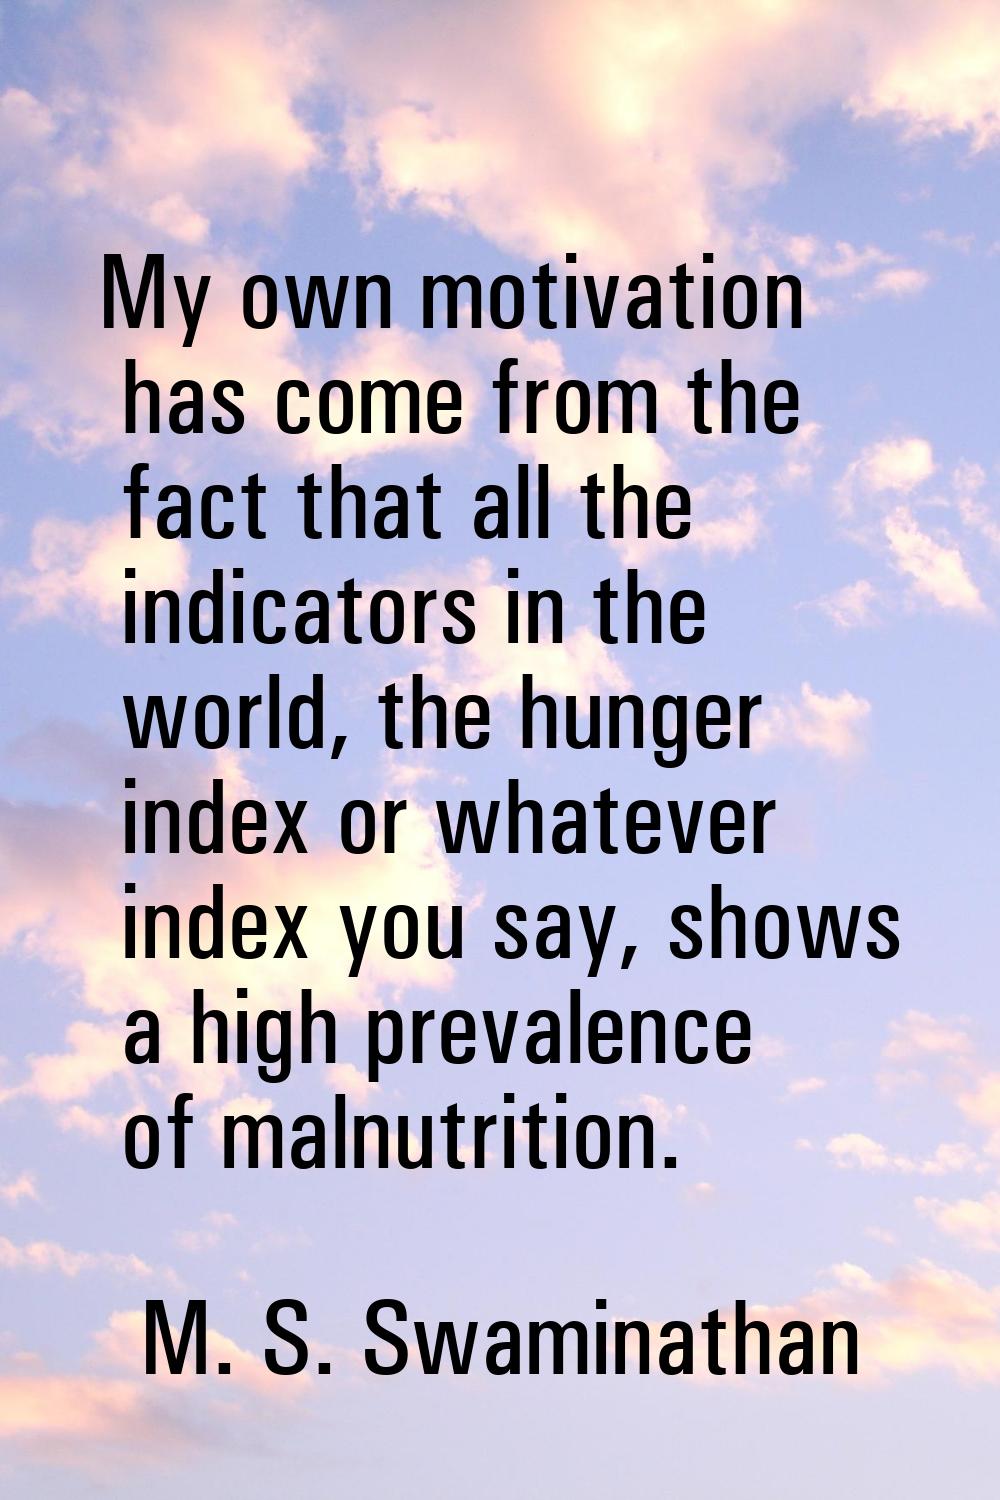 My own motivation has come from the fact that all the indicators in the world, the hunger index or 